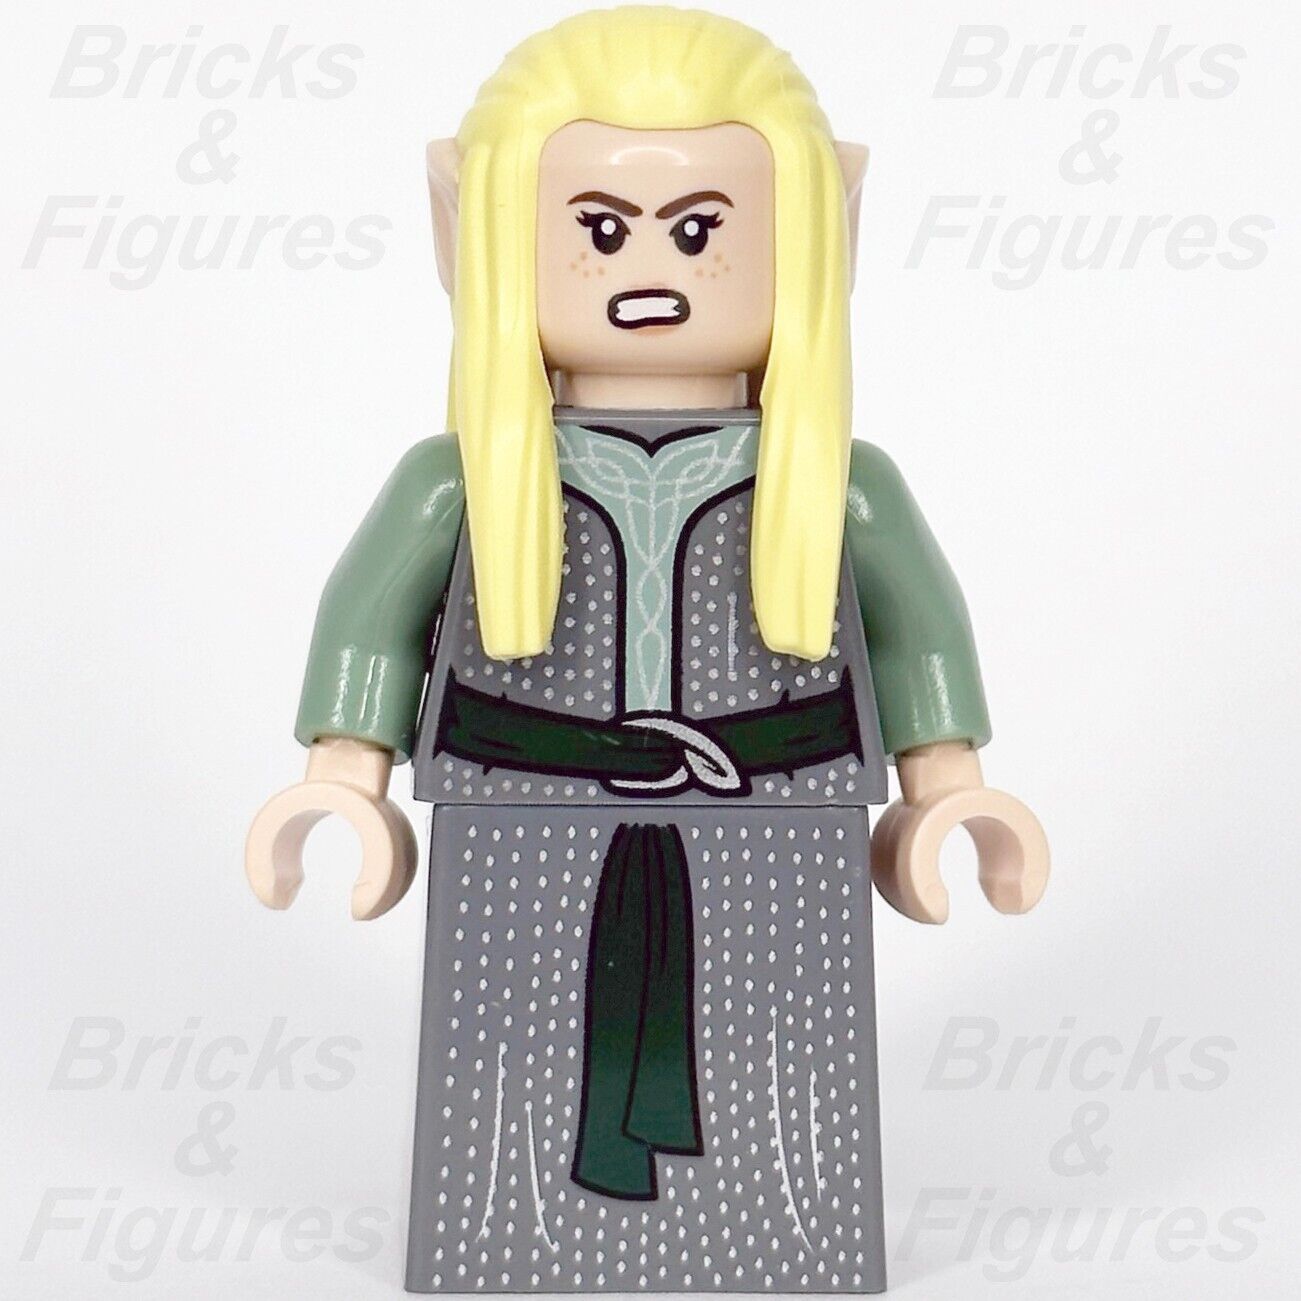 LEGO Rivendell Elf Minifigure The Hobbit & The Lord of the Rings 10316 lor120 - Bricks & Figures